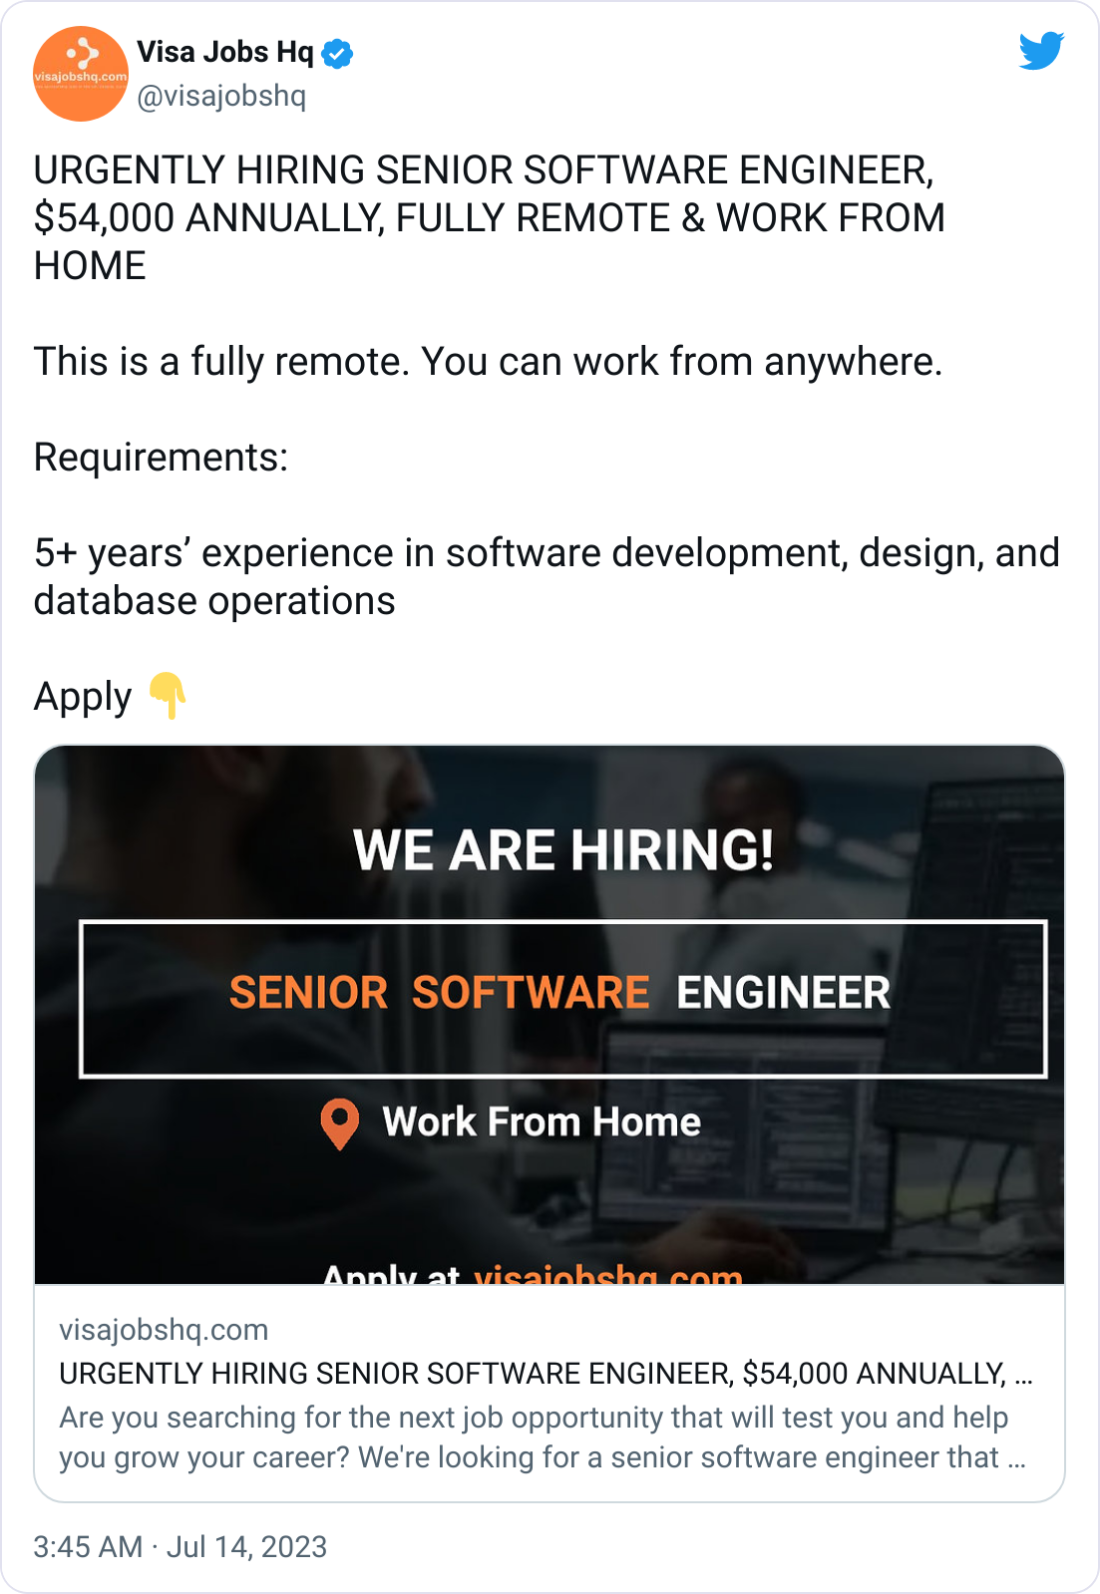 Visa Jobs Hq @visajobshq URGENTLY HIRING SENIOR SOFTWARE ENGINEER, $54,000 ANNUALLY, FULLY REMOTE & WORK FROM HOME  This is a fully remote. You can work from anywhere.   Requirements:   5+ years’ experience in software development, design, and database operations 